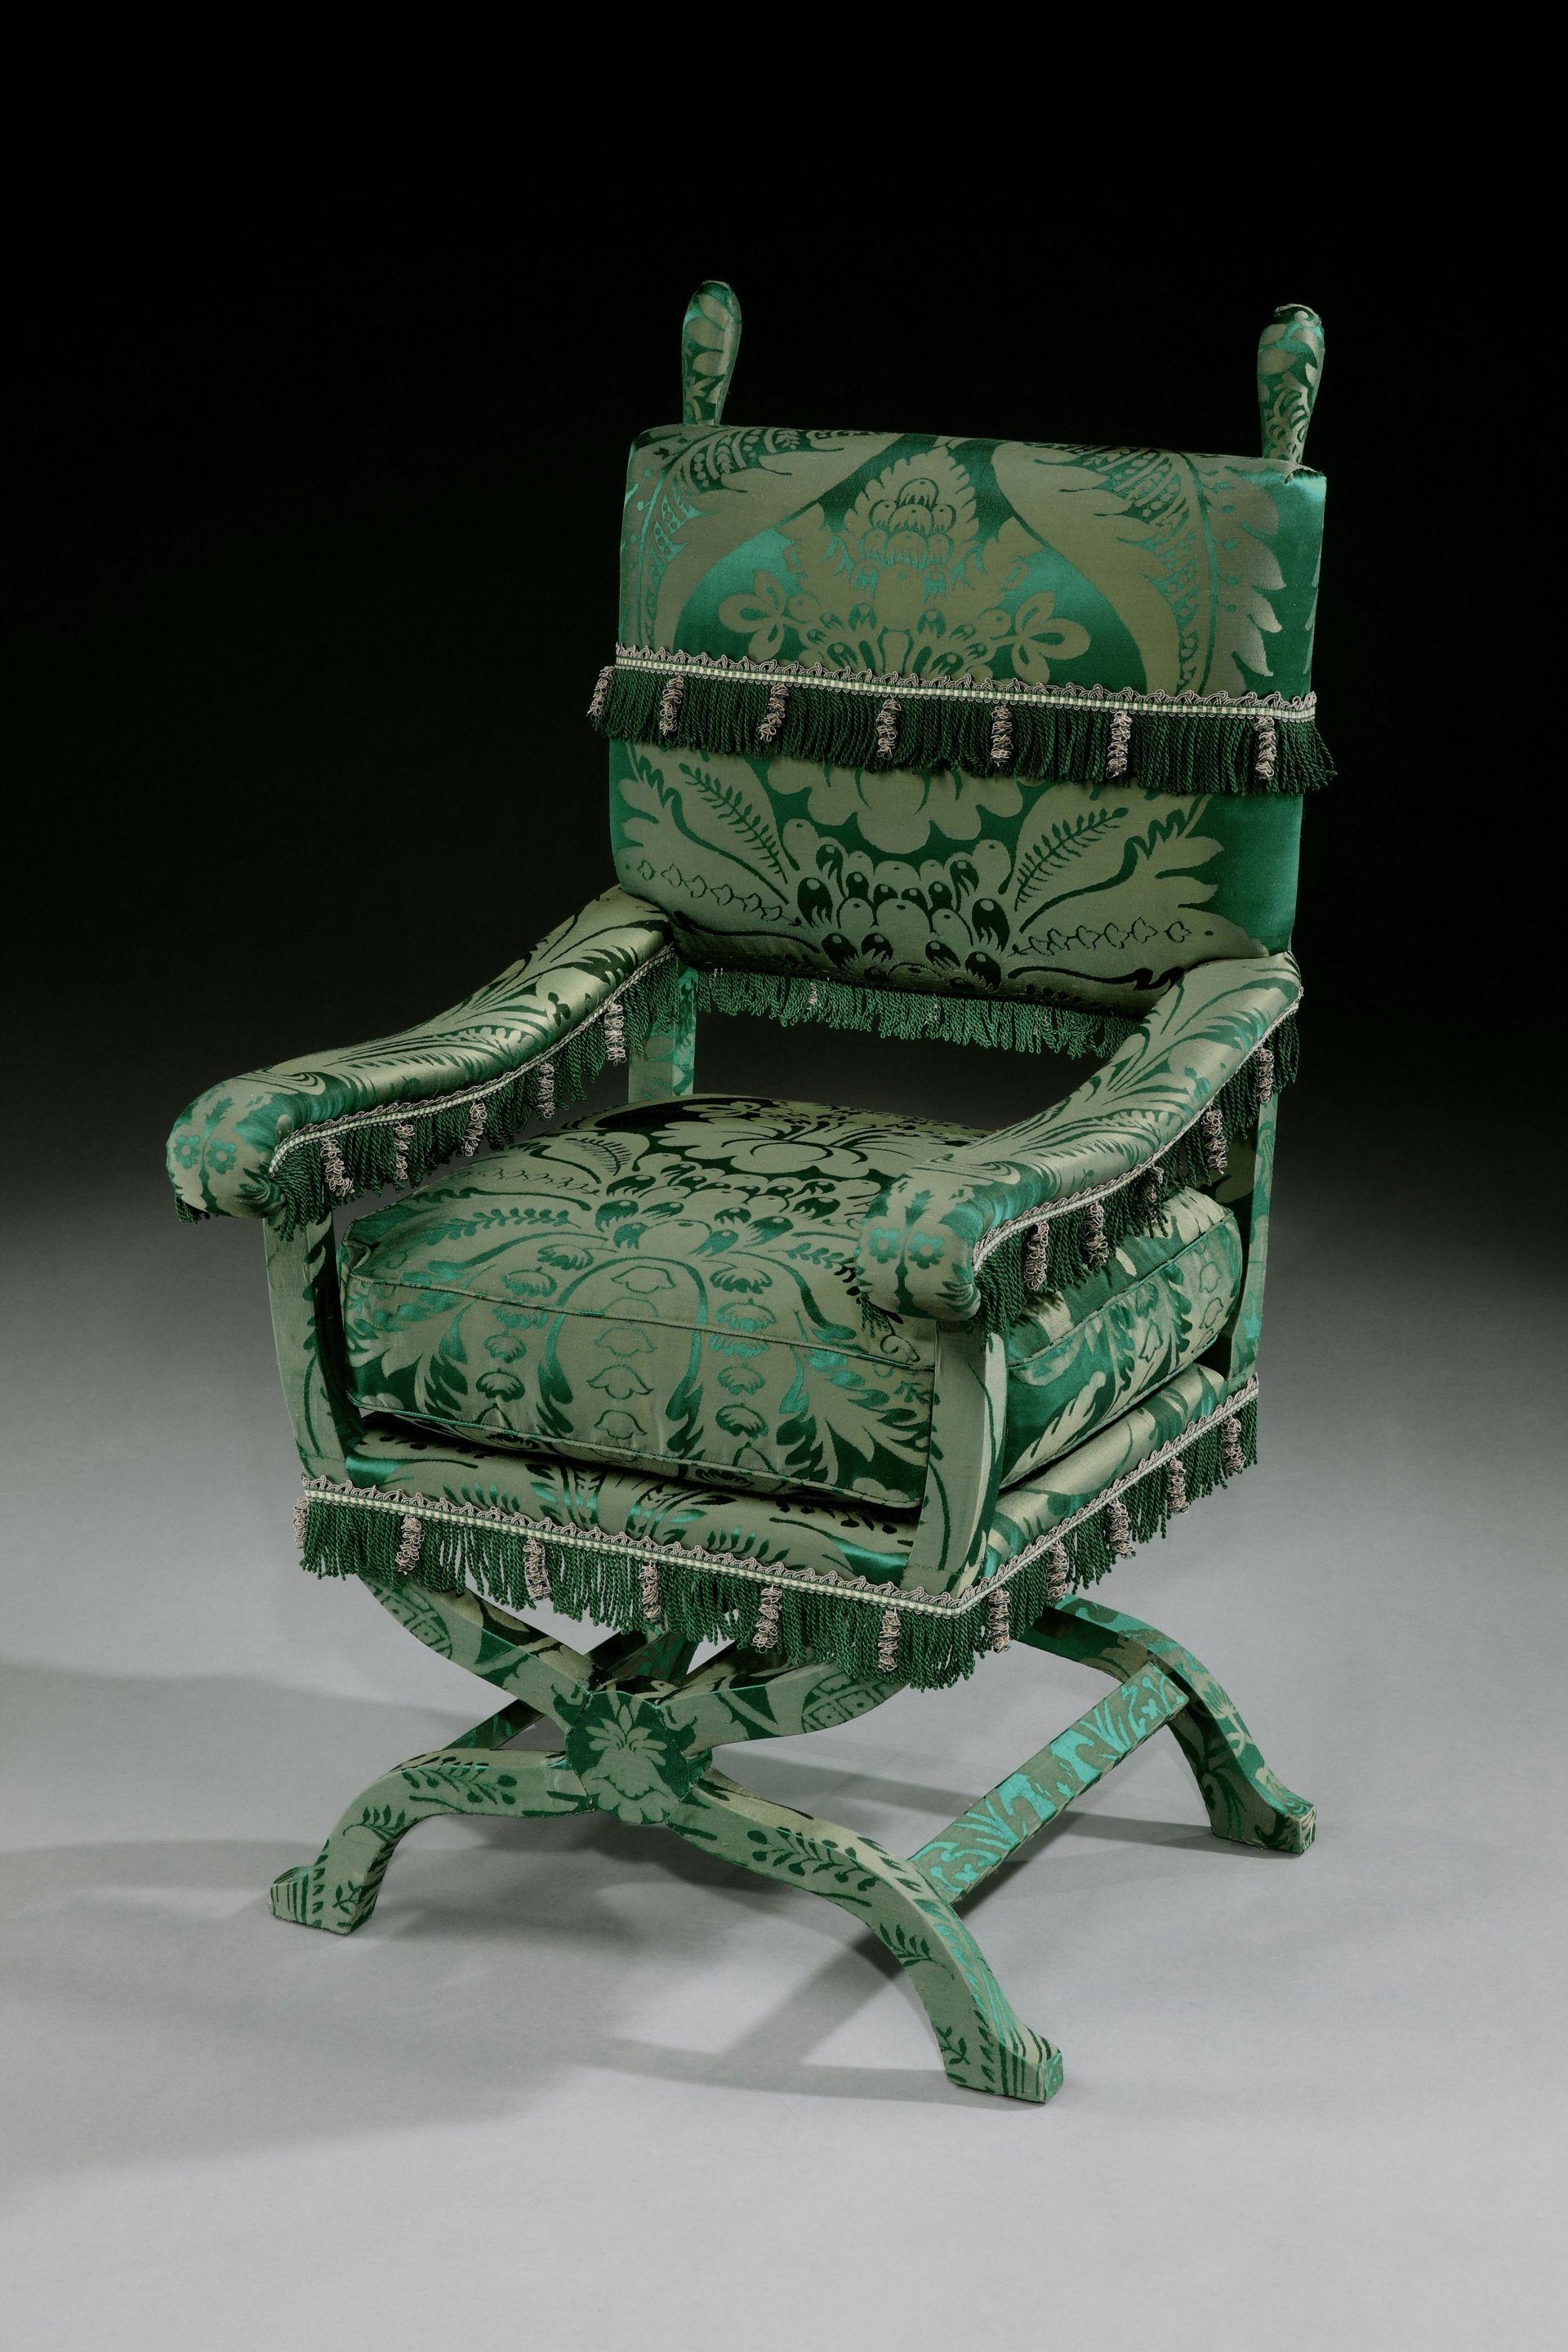 Armchair, X-Frame, 19th Century, English Jacobean-Style, Upholstered in a Green 3